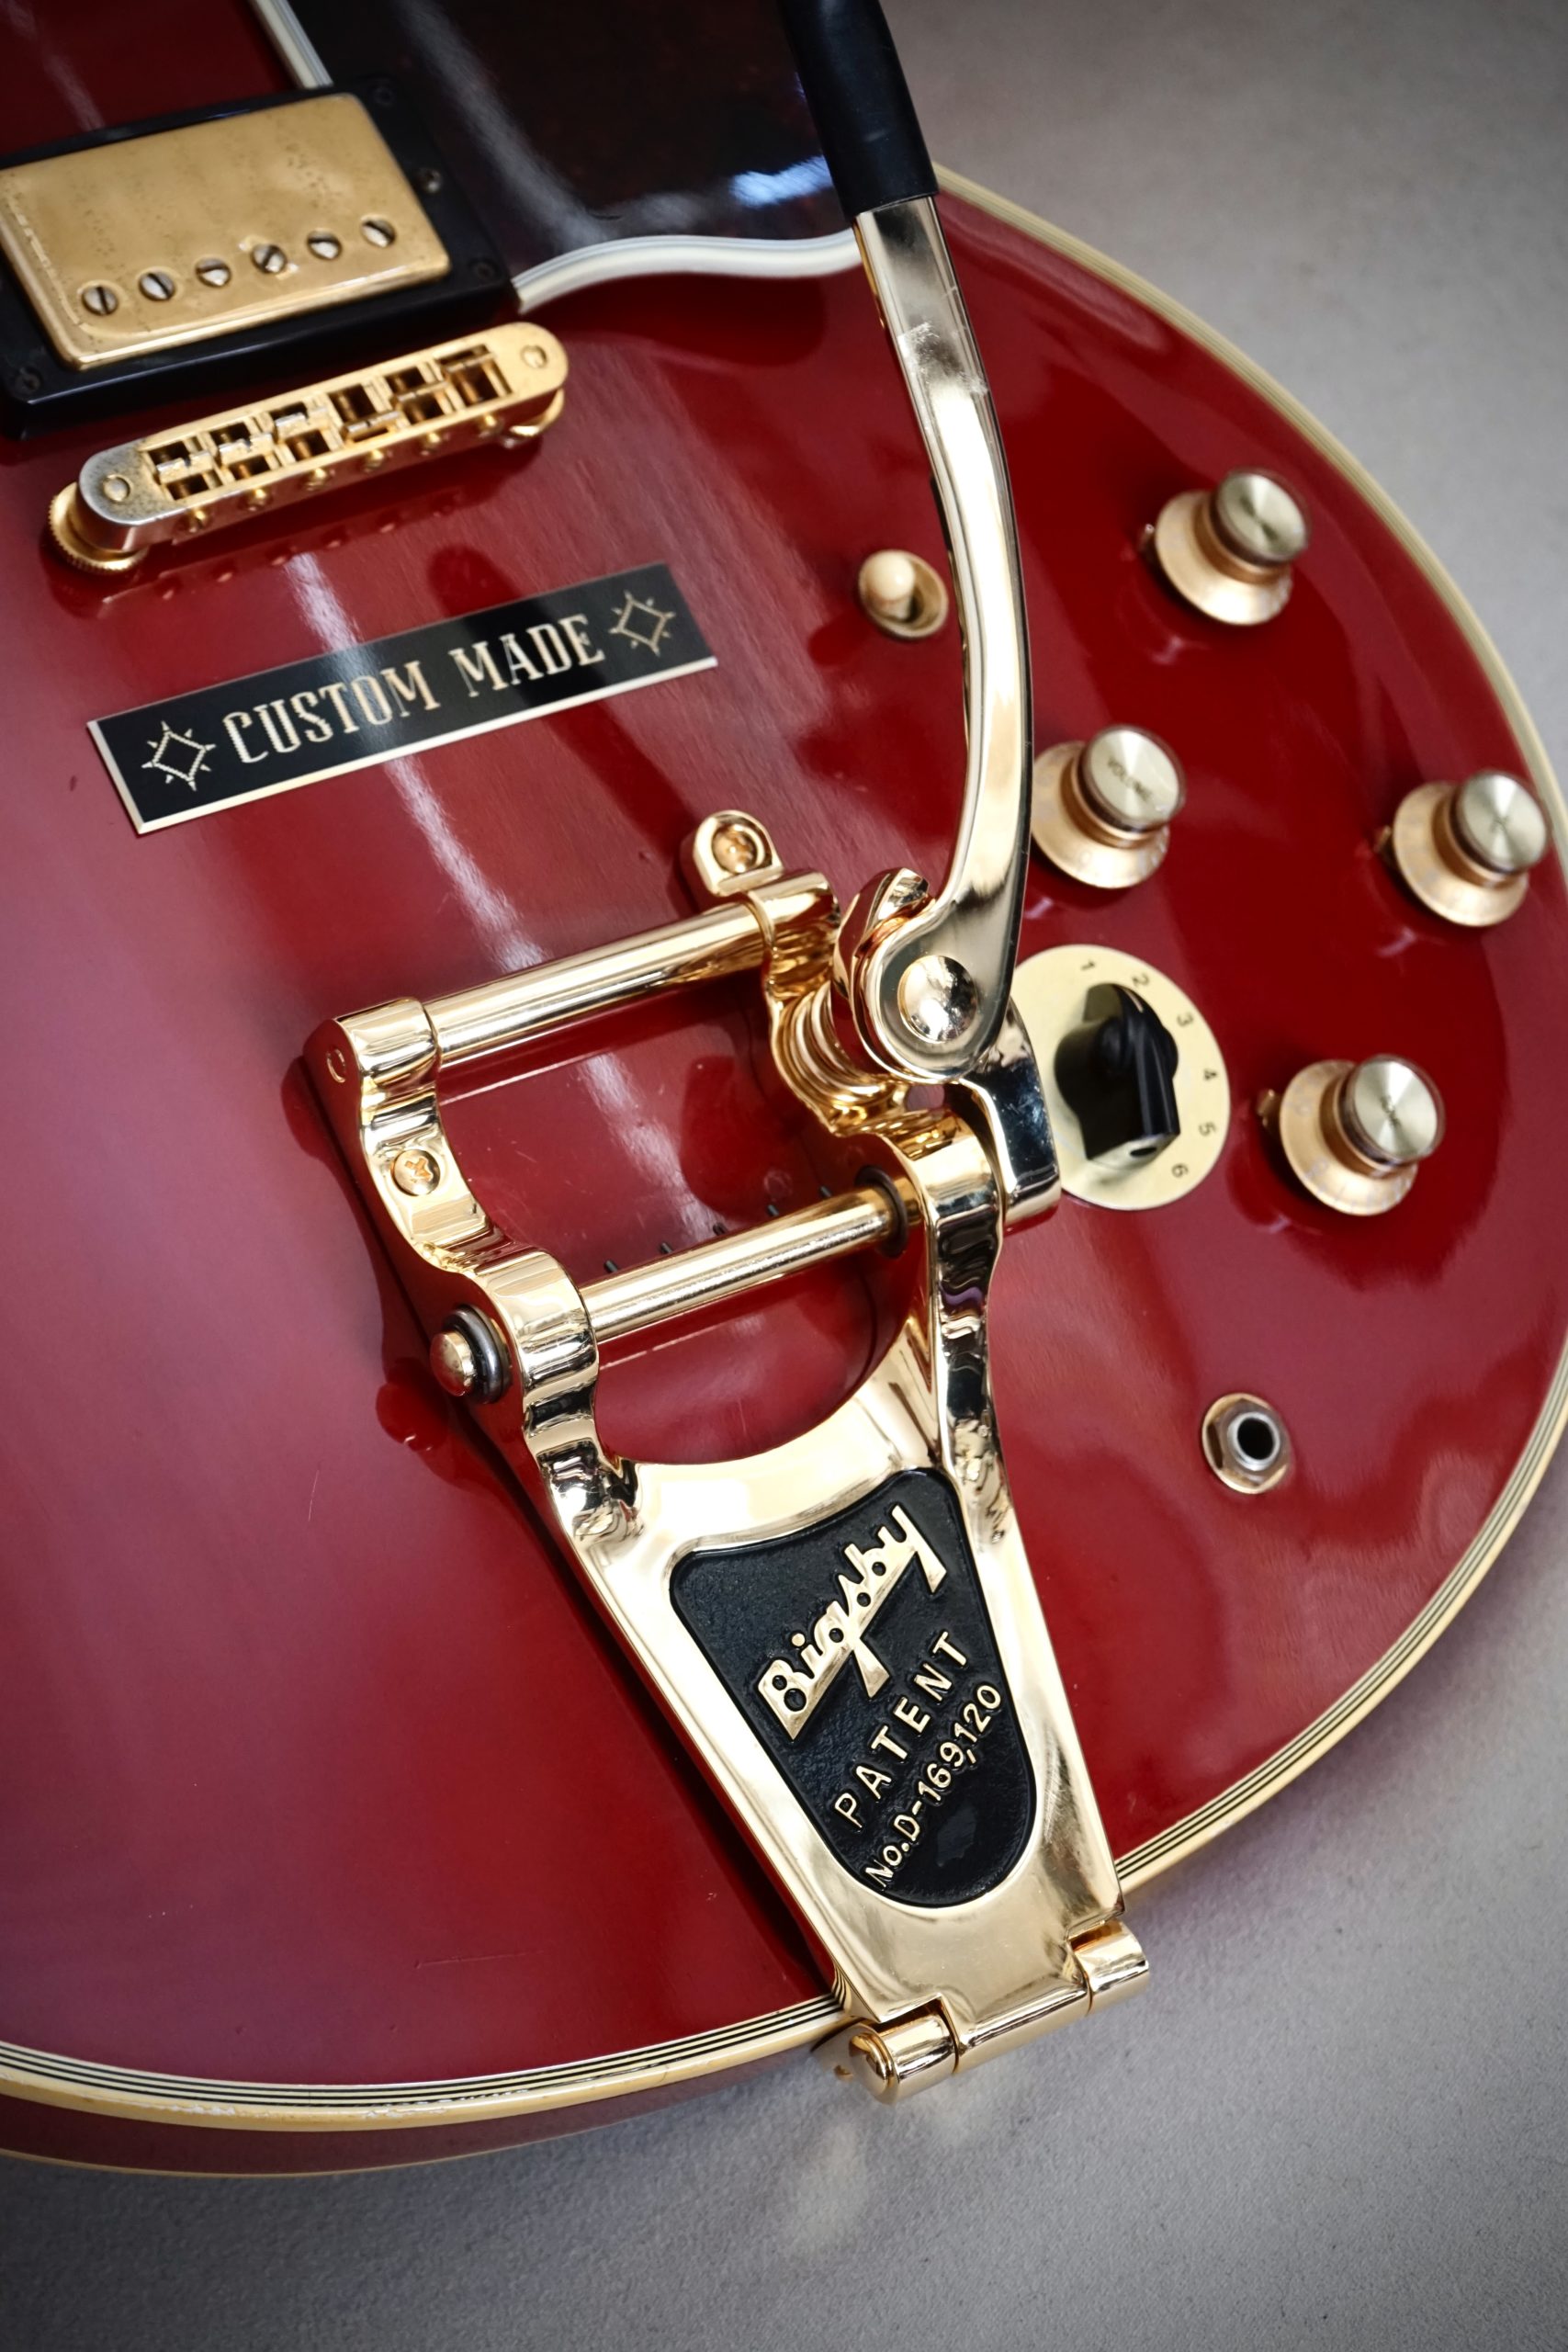 Gibson Lucille ルシール 配線 交換 ギブソン ポット Potentionmeter リペア wiring 配線図 TP-6 Bigsby B7 Gold 取り付け インストール